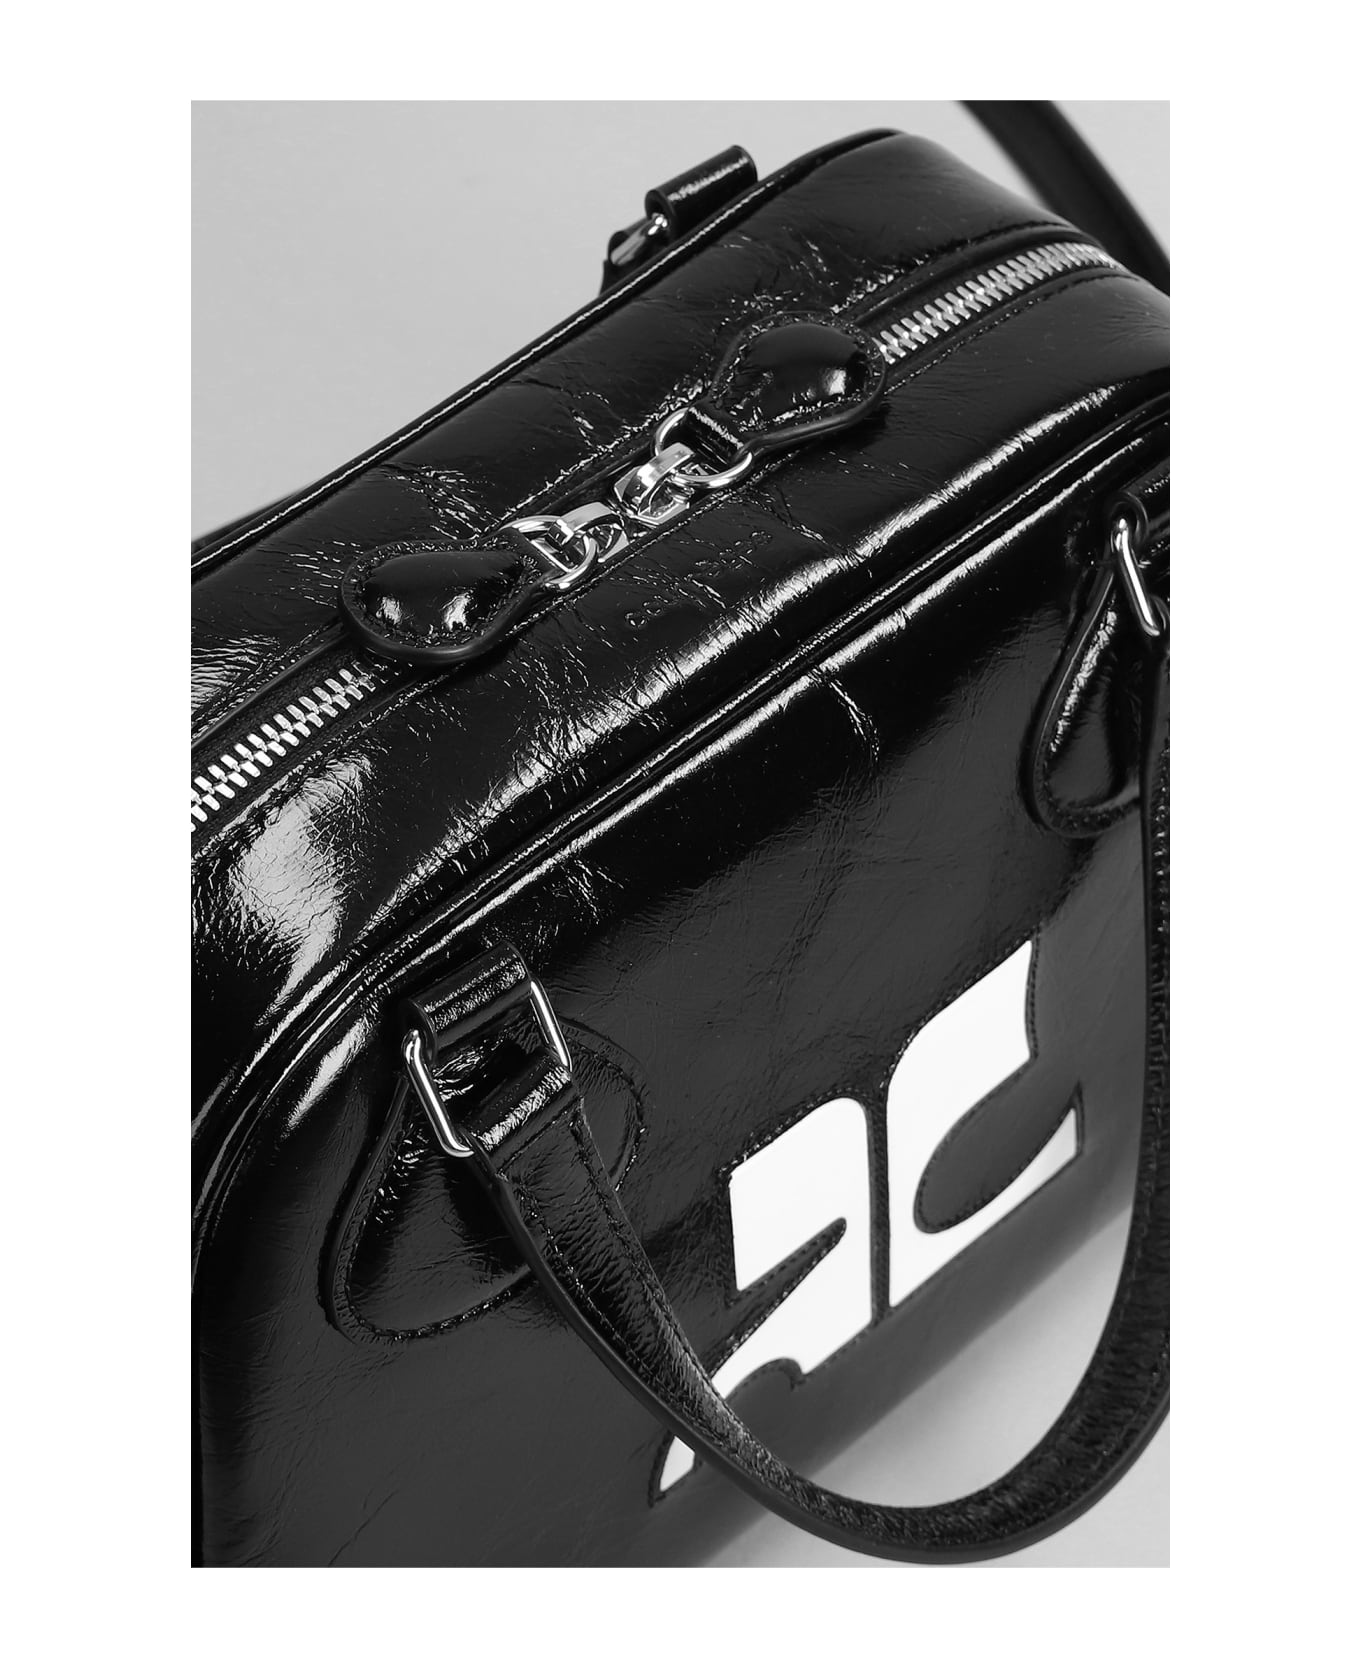 Courrèges Bowling Hand Bag In Black Patent Leather - black